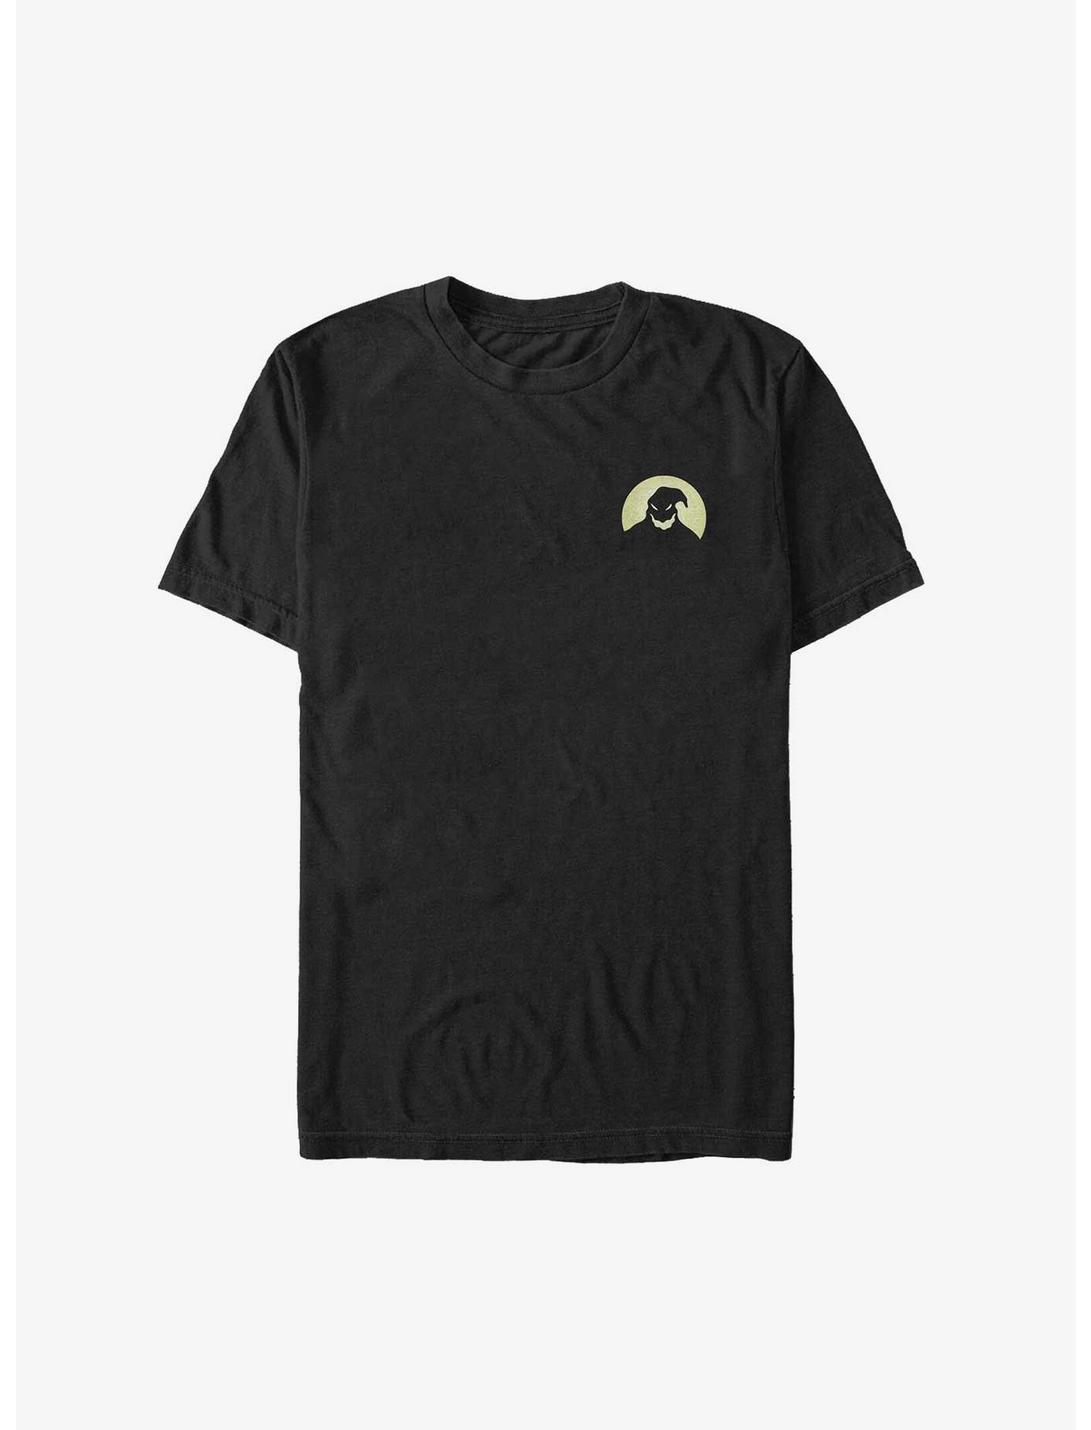 The Nightmare Before Christmas Oogie Boogie Logo Big & Tall T-Shirt, BLACK, hi-res